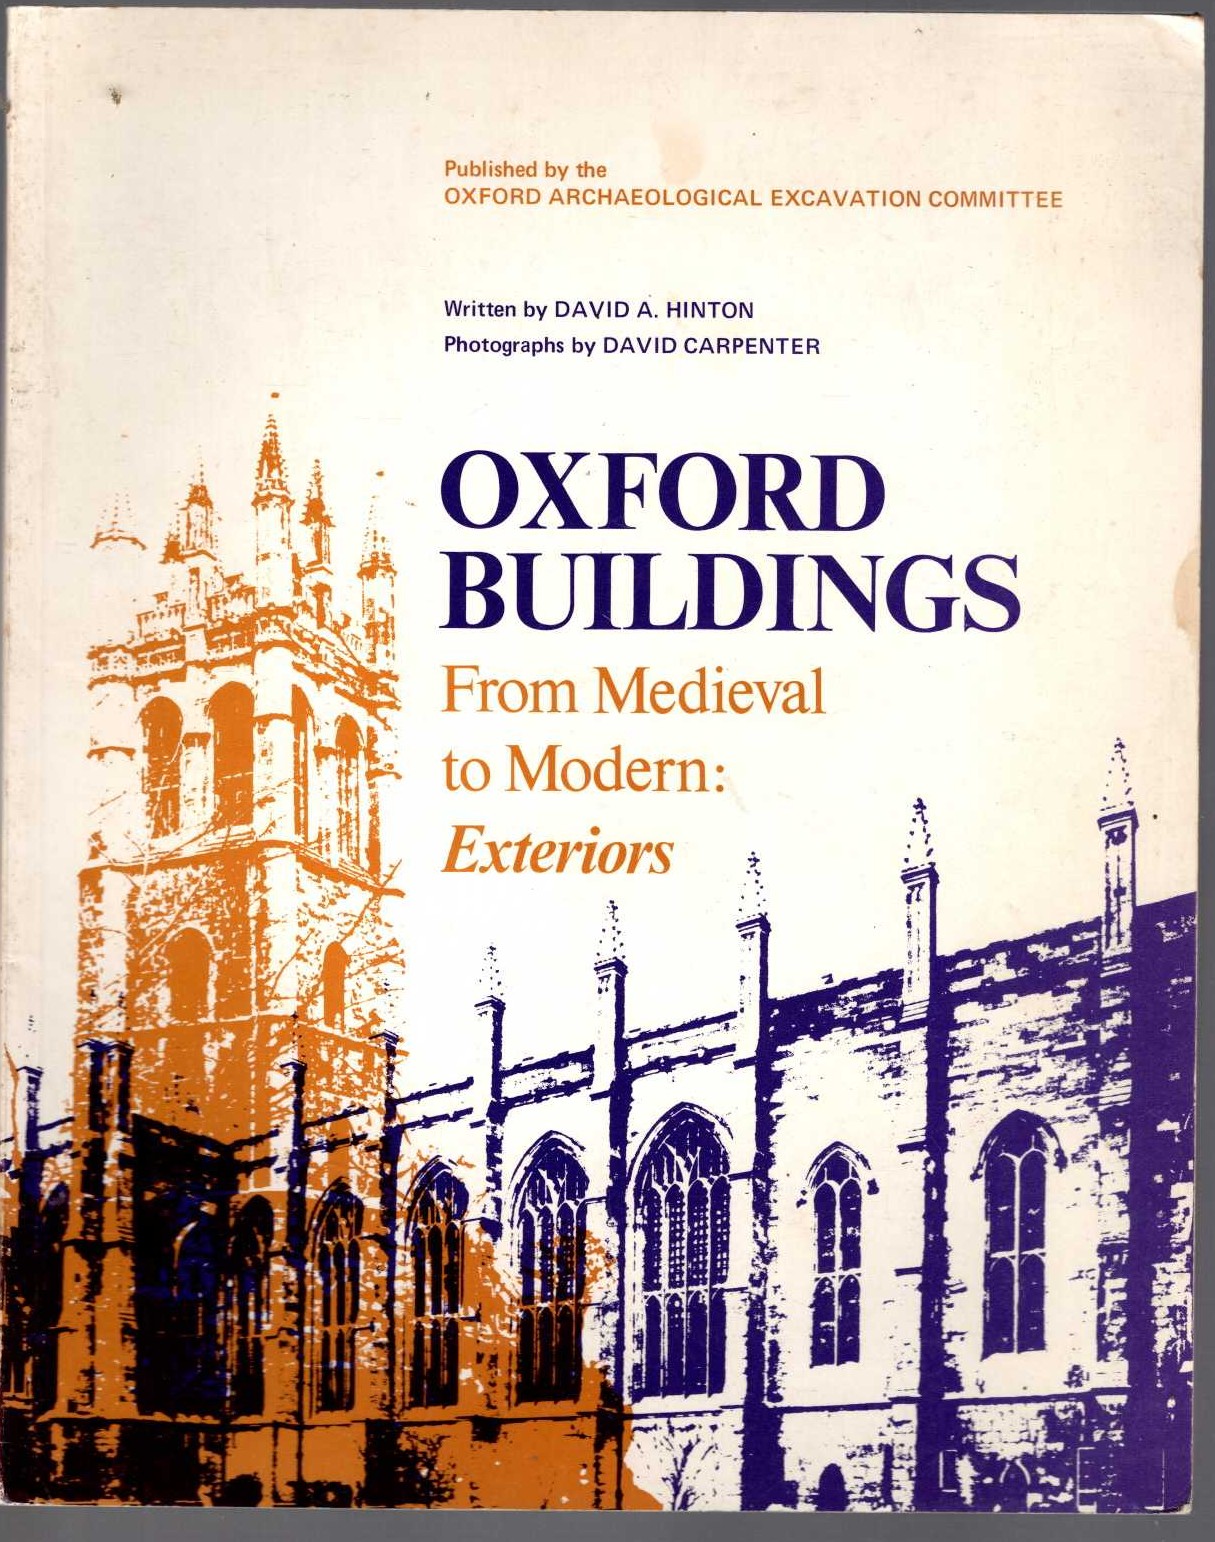 \ OXFORD BUILDINGS. From Medieval to Modern: Exteriors by David A.Hinton front book cover image